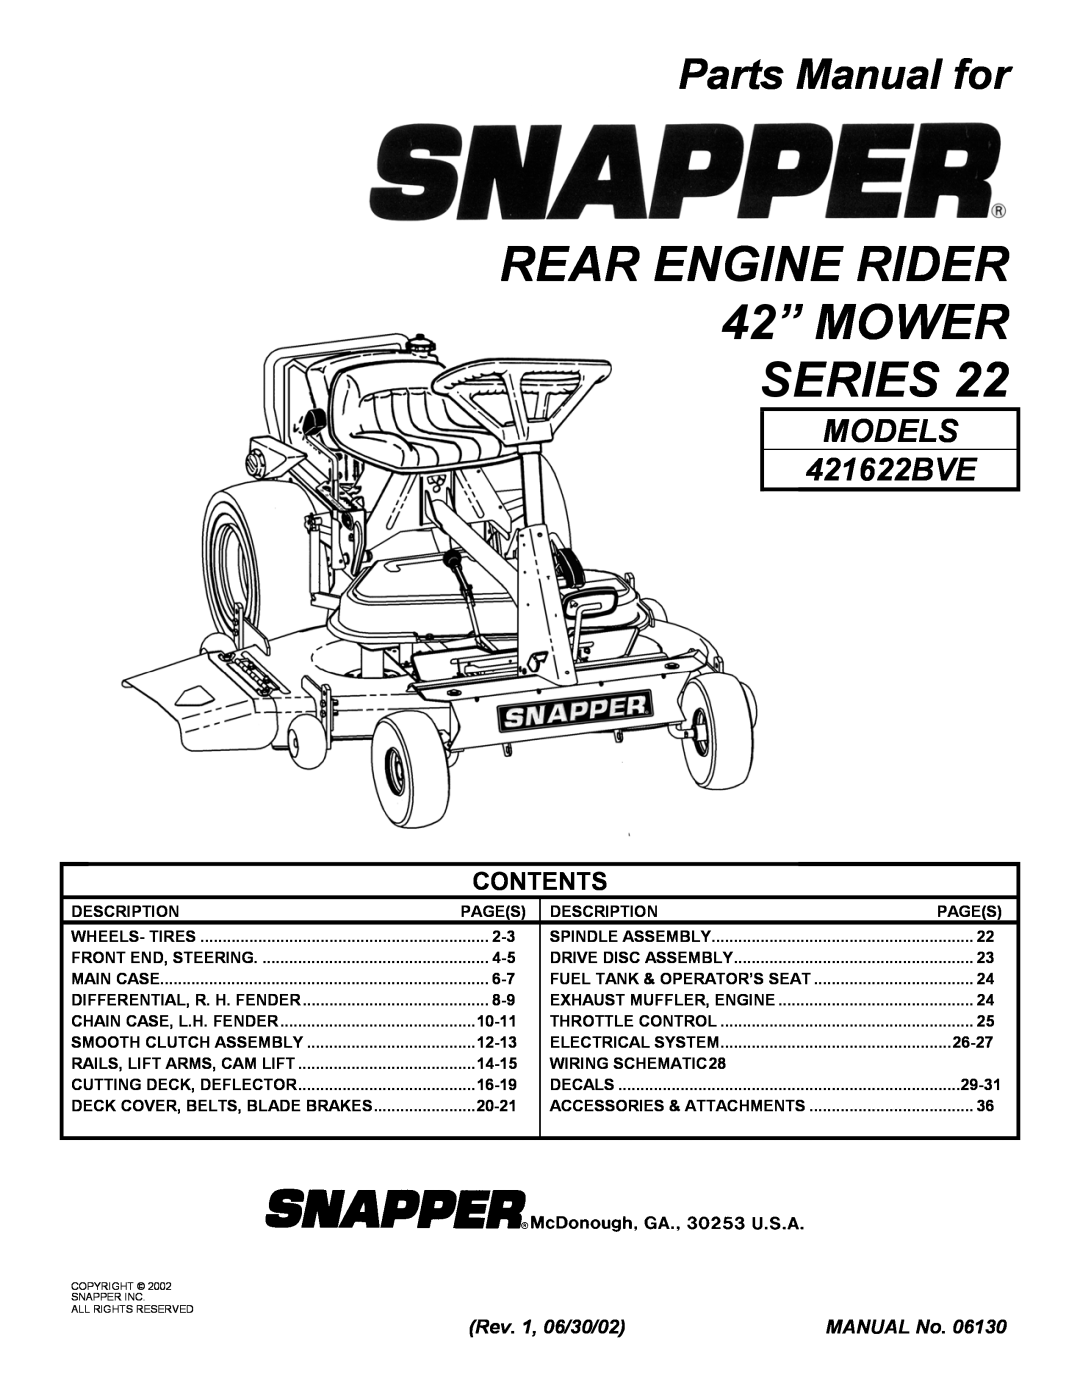 Snapper manual REAR ENGINE RIDER 42” MOWER SERIES, Parts Manual for, MODELS 421622BVE, Contents, Rev. 1, 06/30/02 